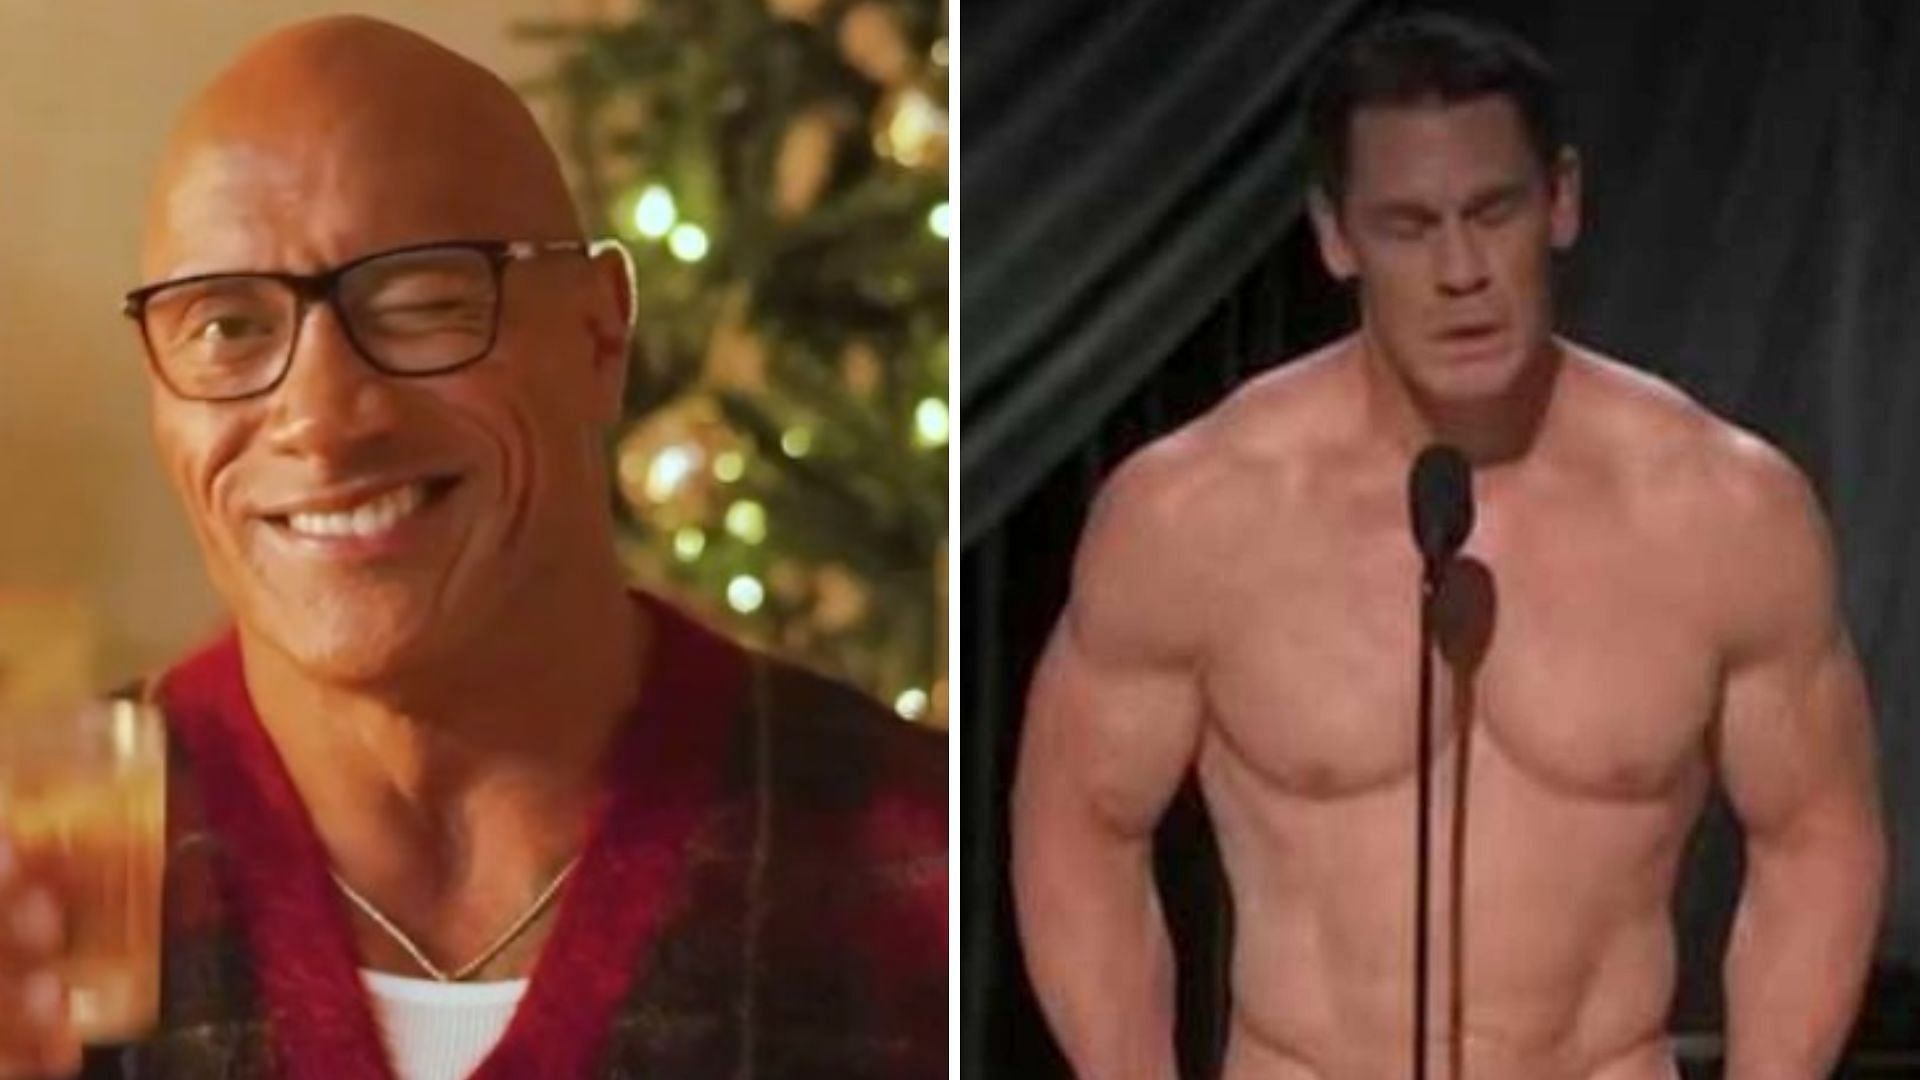 The Rock on the left and John Cena on the right [Image credits: Dwayne Johnson